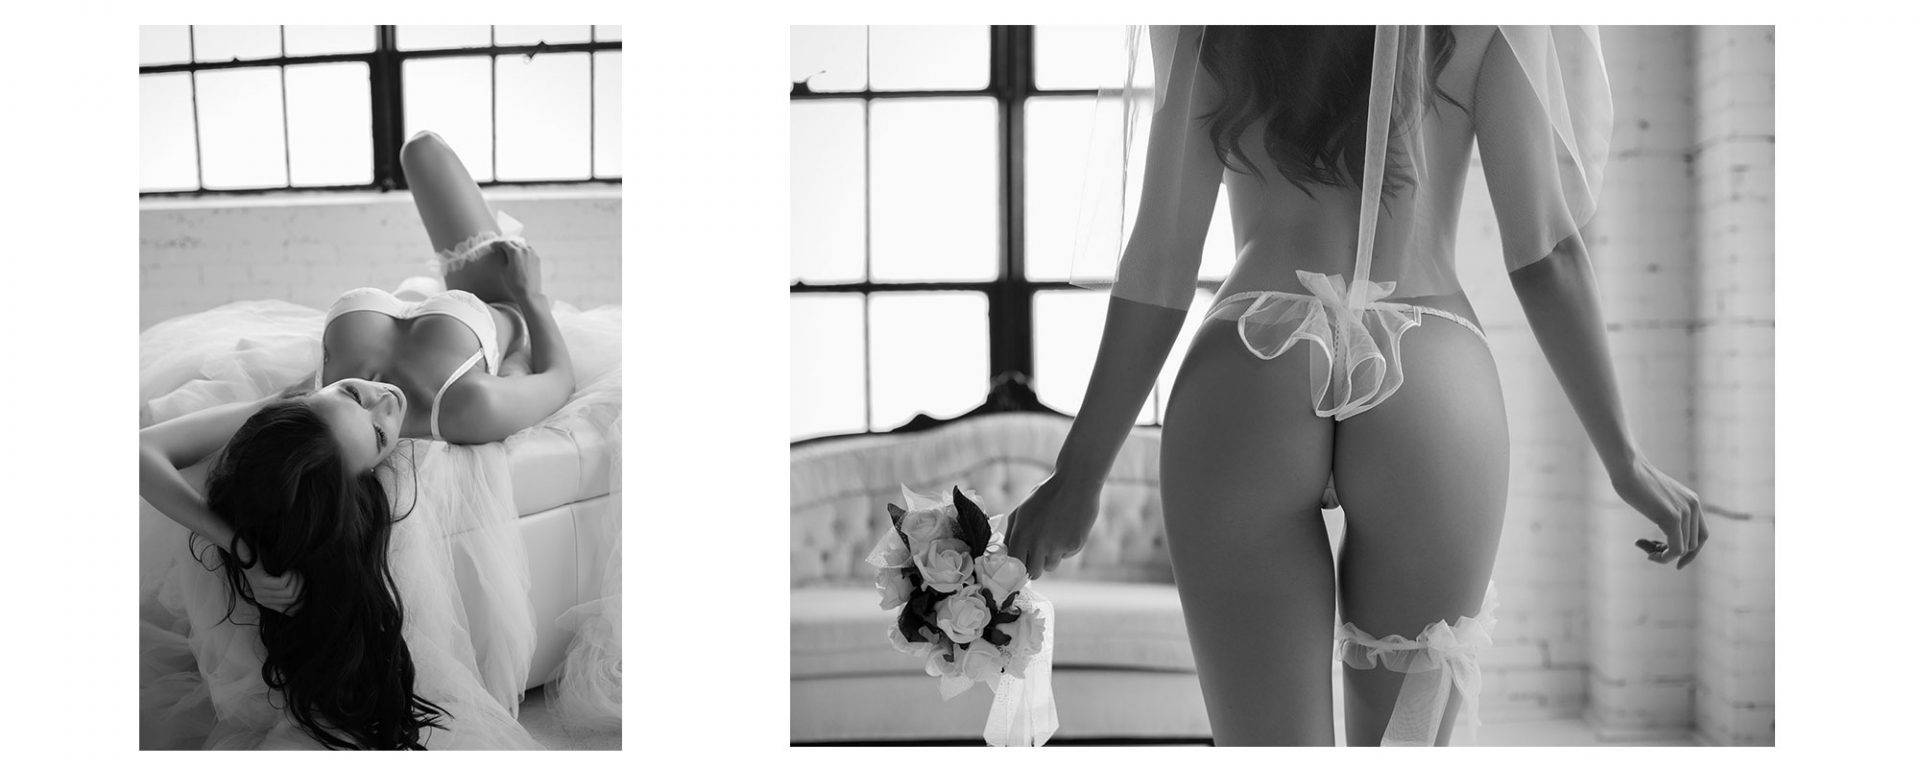 Lady in white lingerie holding flowers for a boudoir photoshoot.